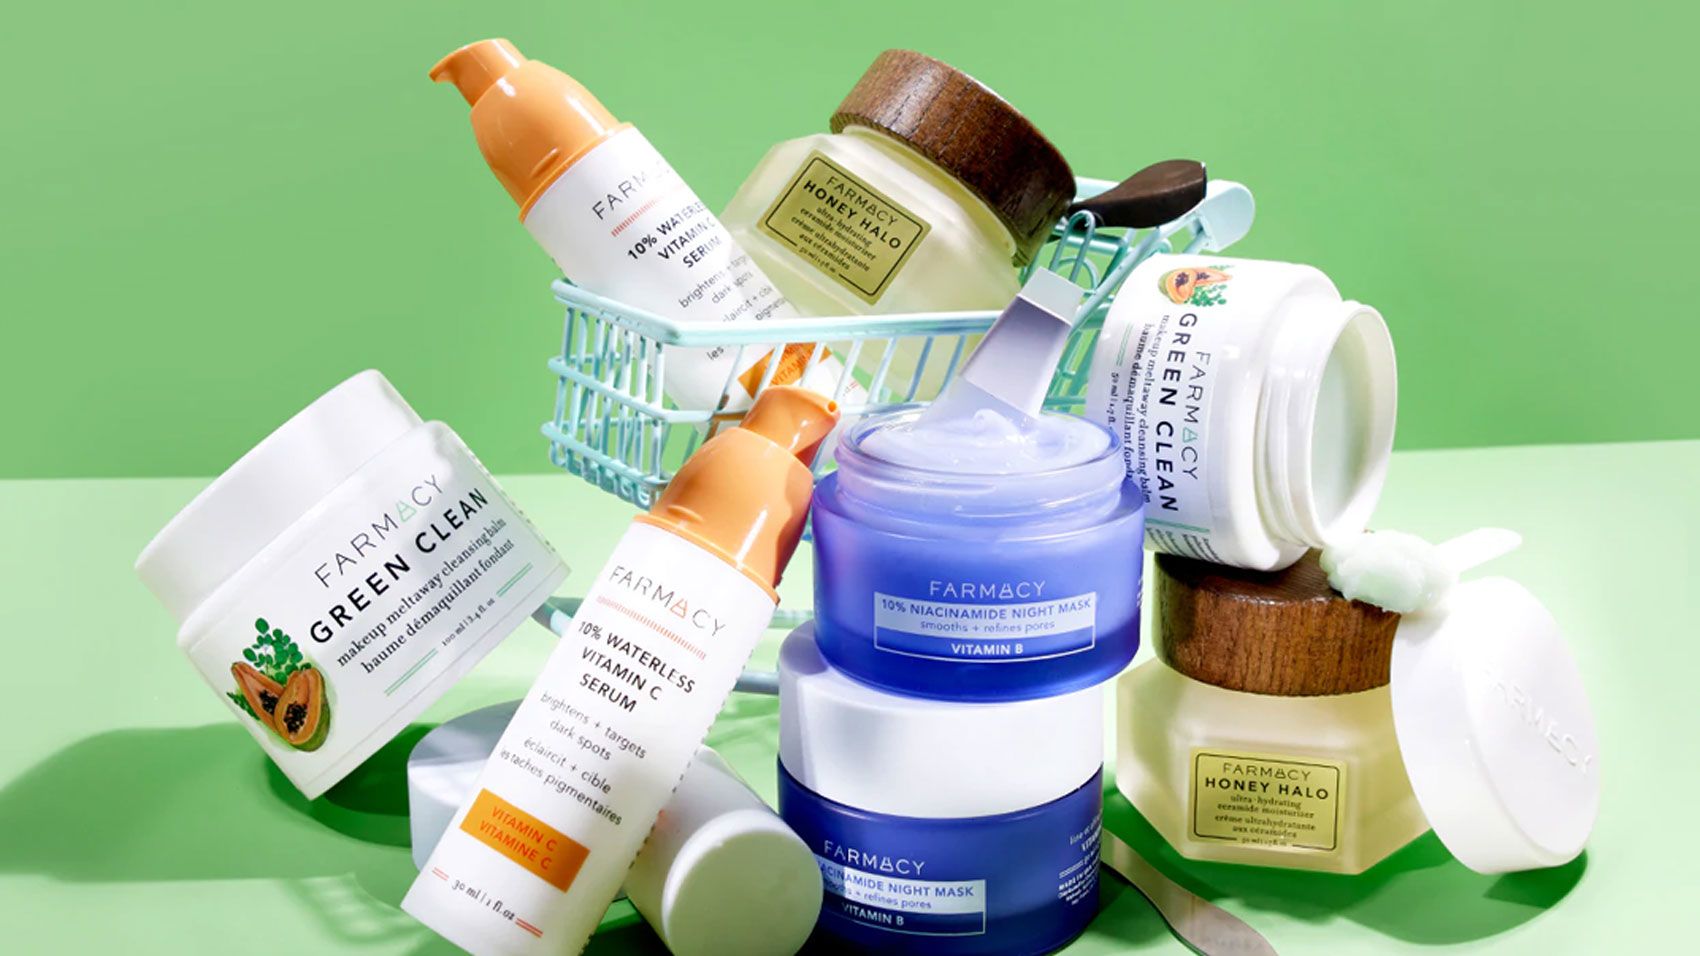 Clean beauty vs. green beauty: Here's what you should know about